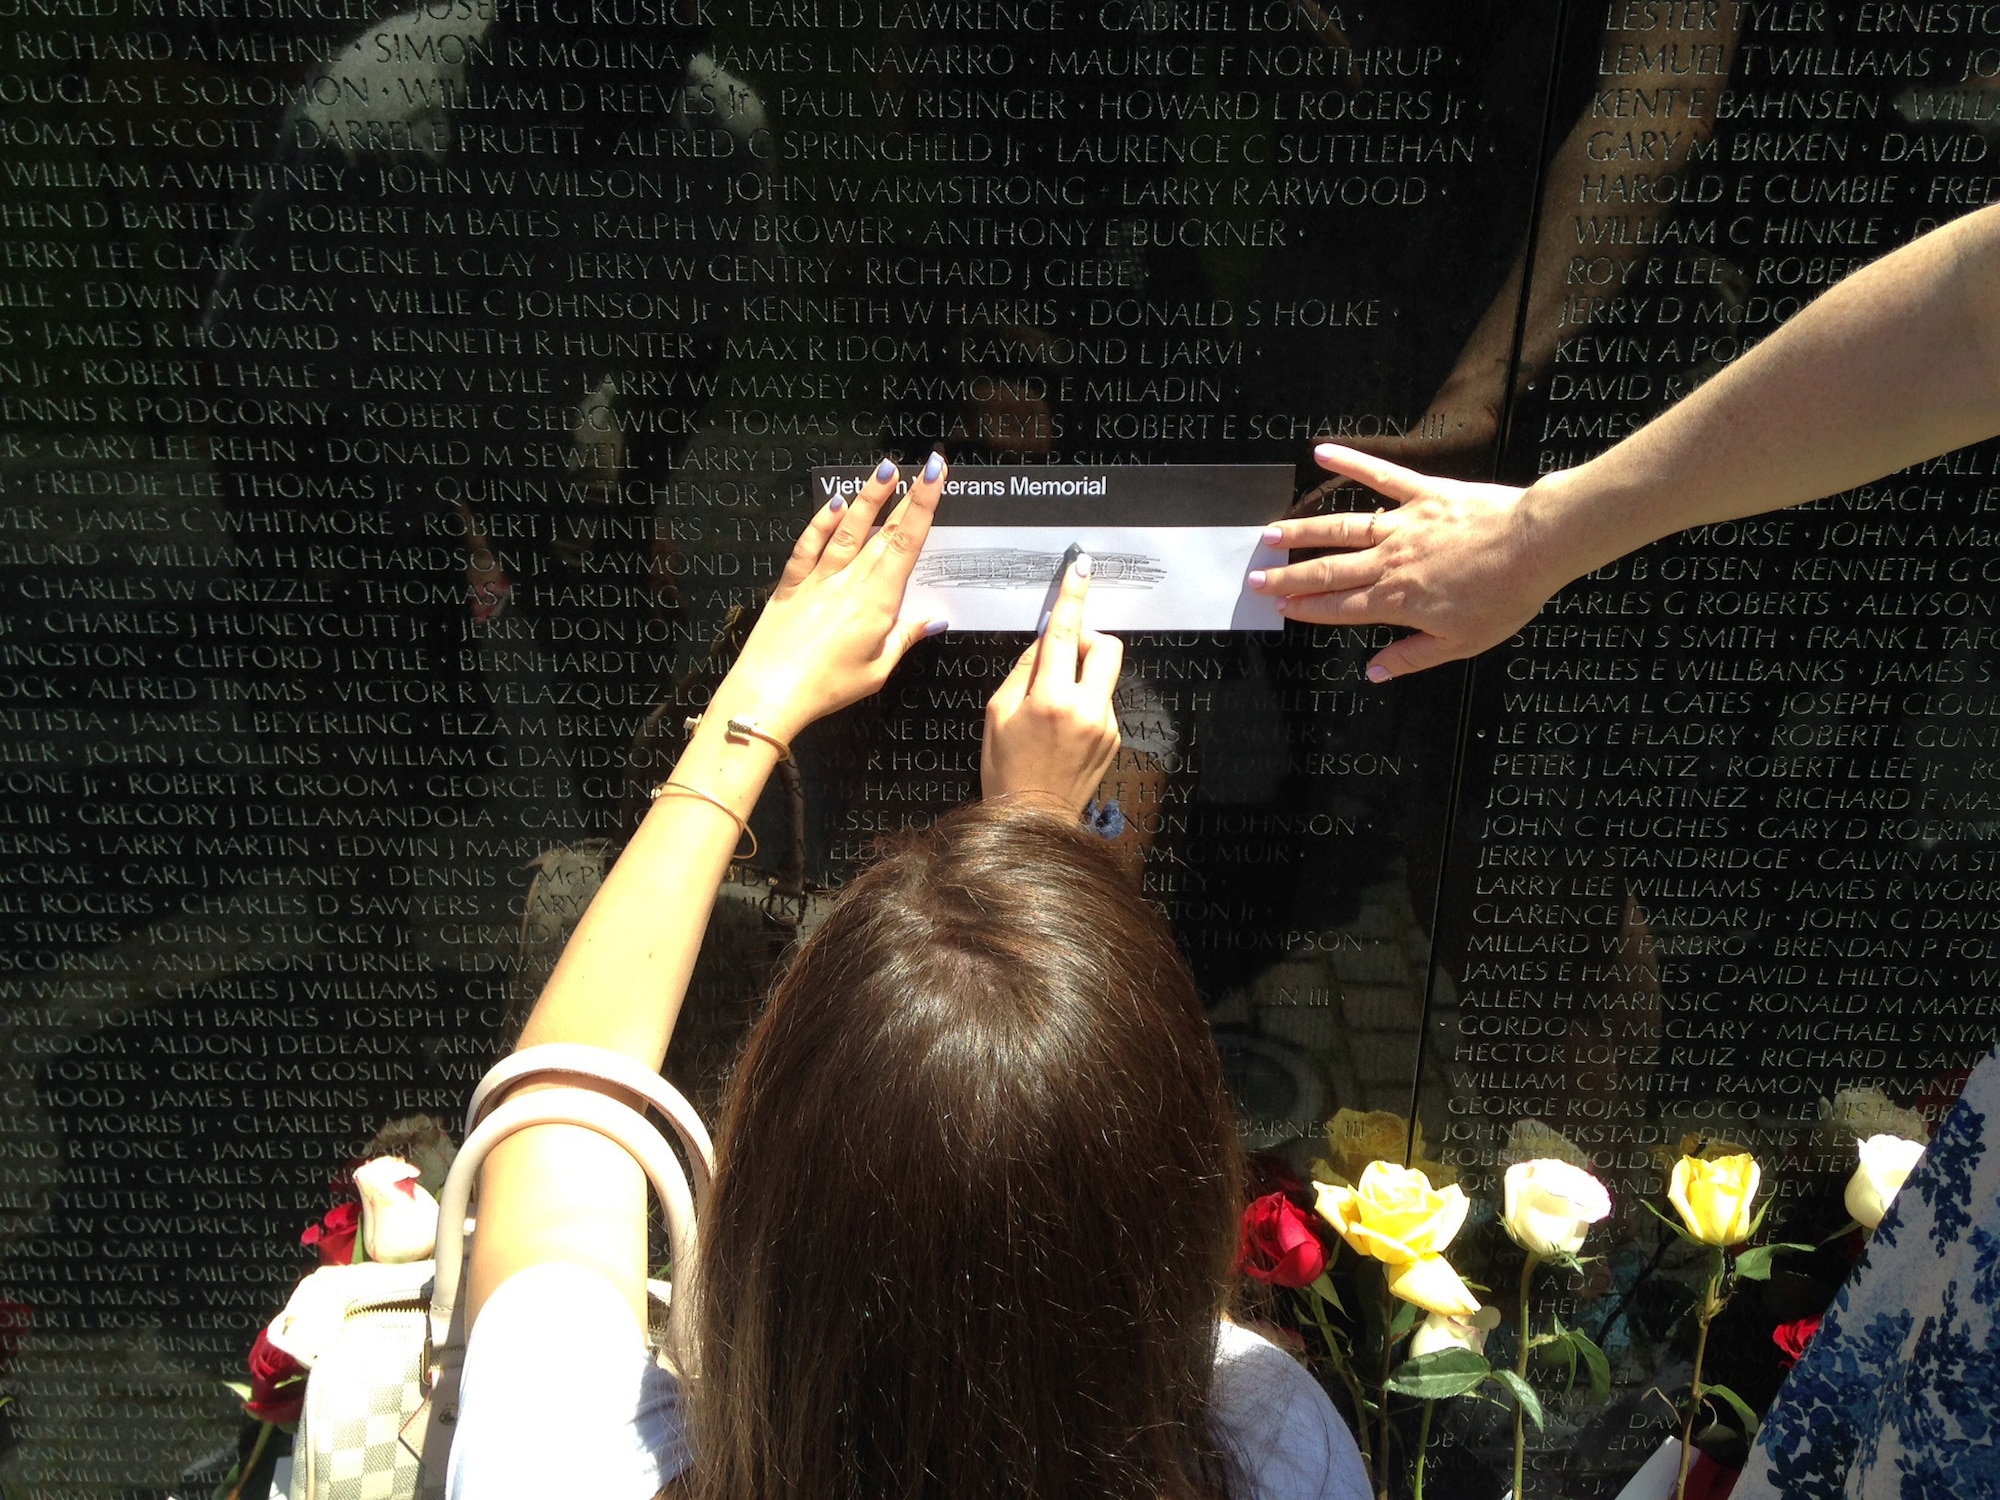 On Father’s Day June 15, 2014, Caroline Kozak, the daughter of Maureen and Col. Raymond A. Kozak, the 512th Airlift Wing commander at Dover Air Force Base, Del., rubs a pencil across her grandfather’s name on the Vietnam Veterans Memorial, in Washington, D.C. Her grandfather was an Air Force fighter pilot, who was shot down over North Vietnam in 1967 and was listed as missing in action until 1976, when he was declared killed in action, body not recovered. (Courtesy photo)